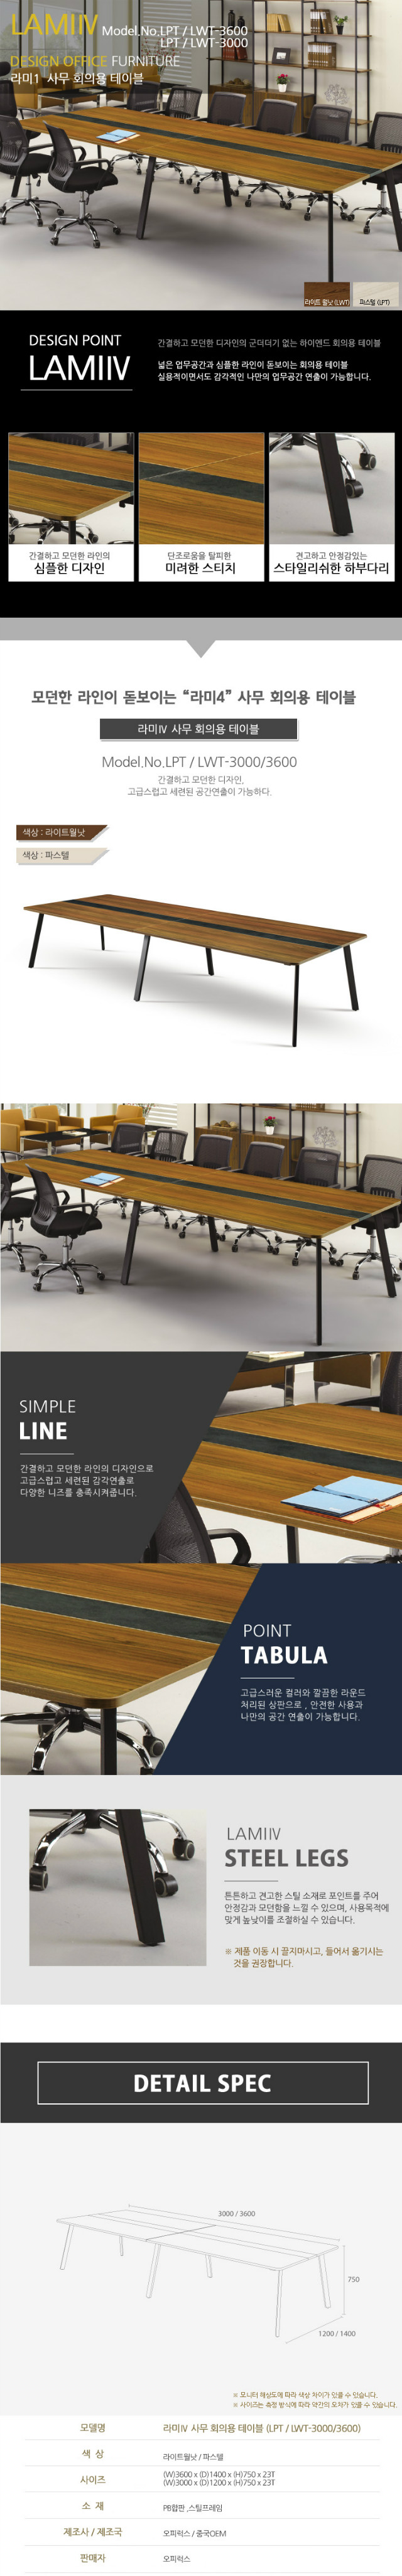 lamiⅣ_conference_table_lpt_lwt-3000,3600.jpg